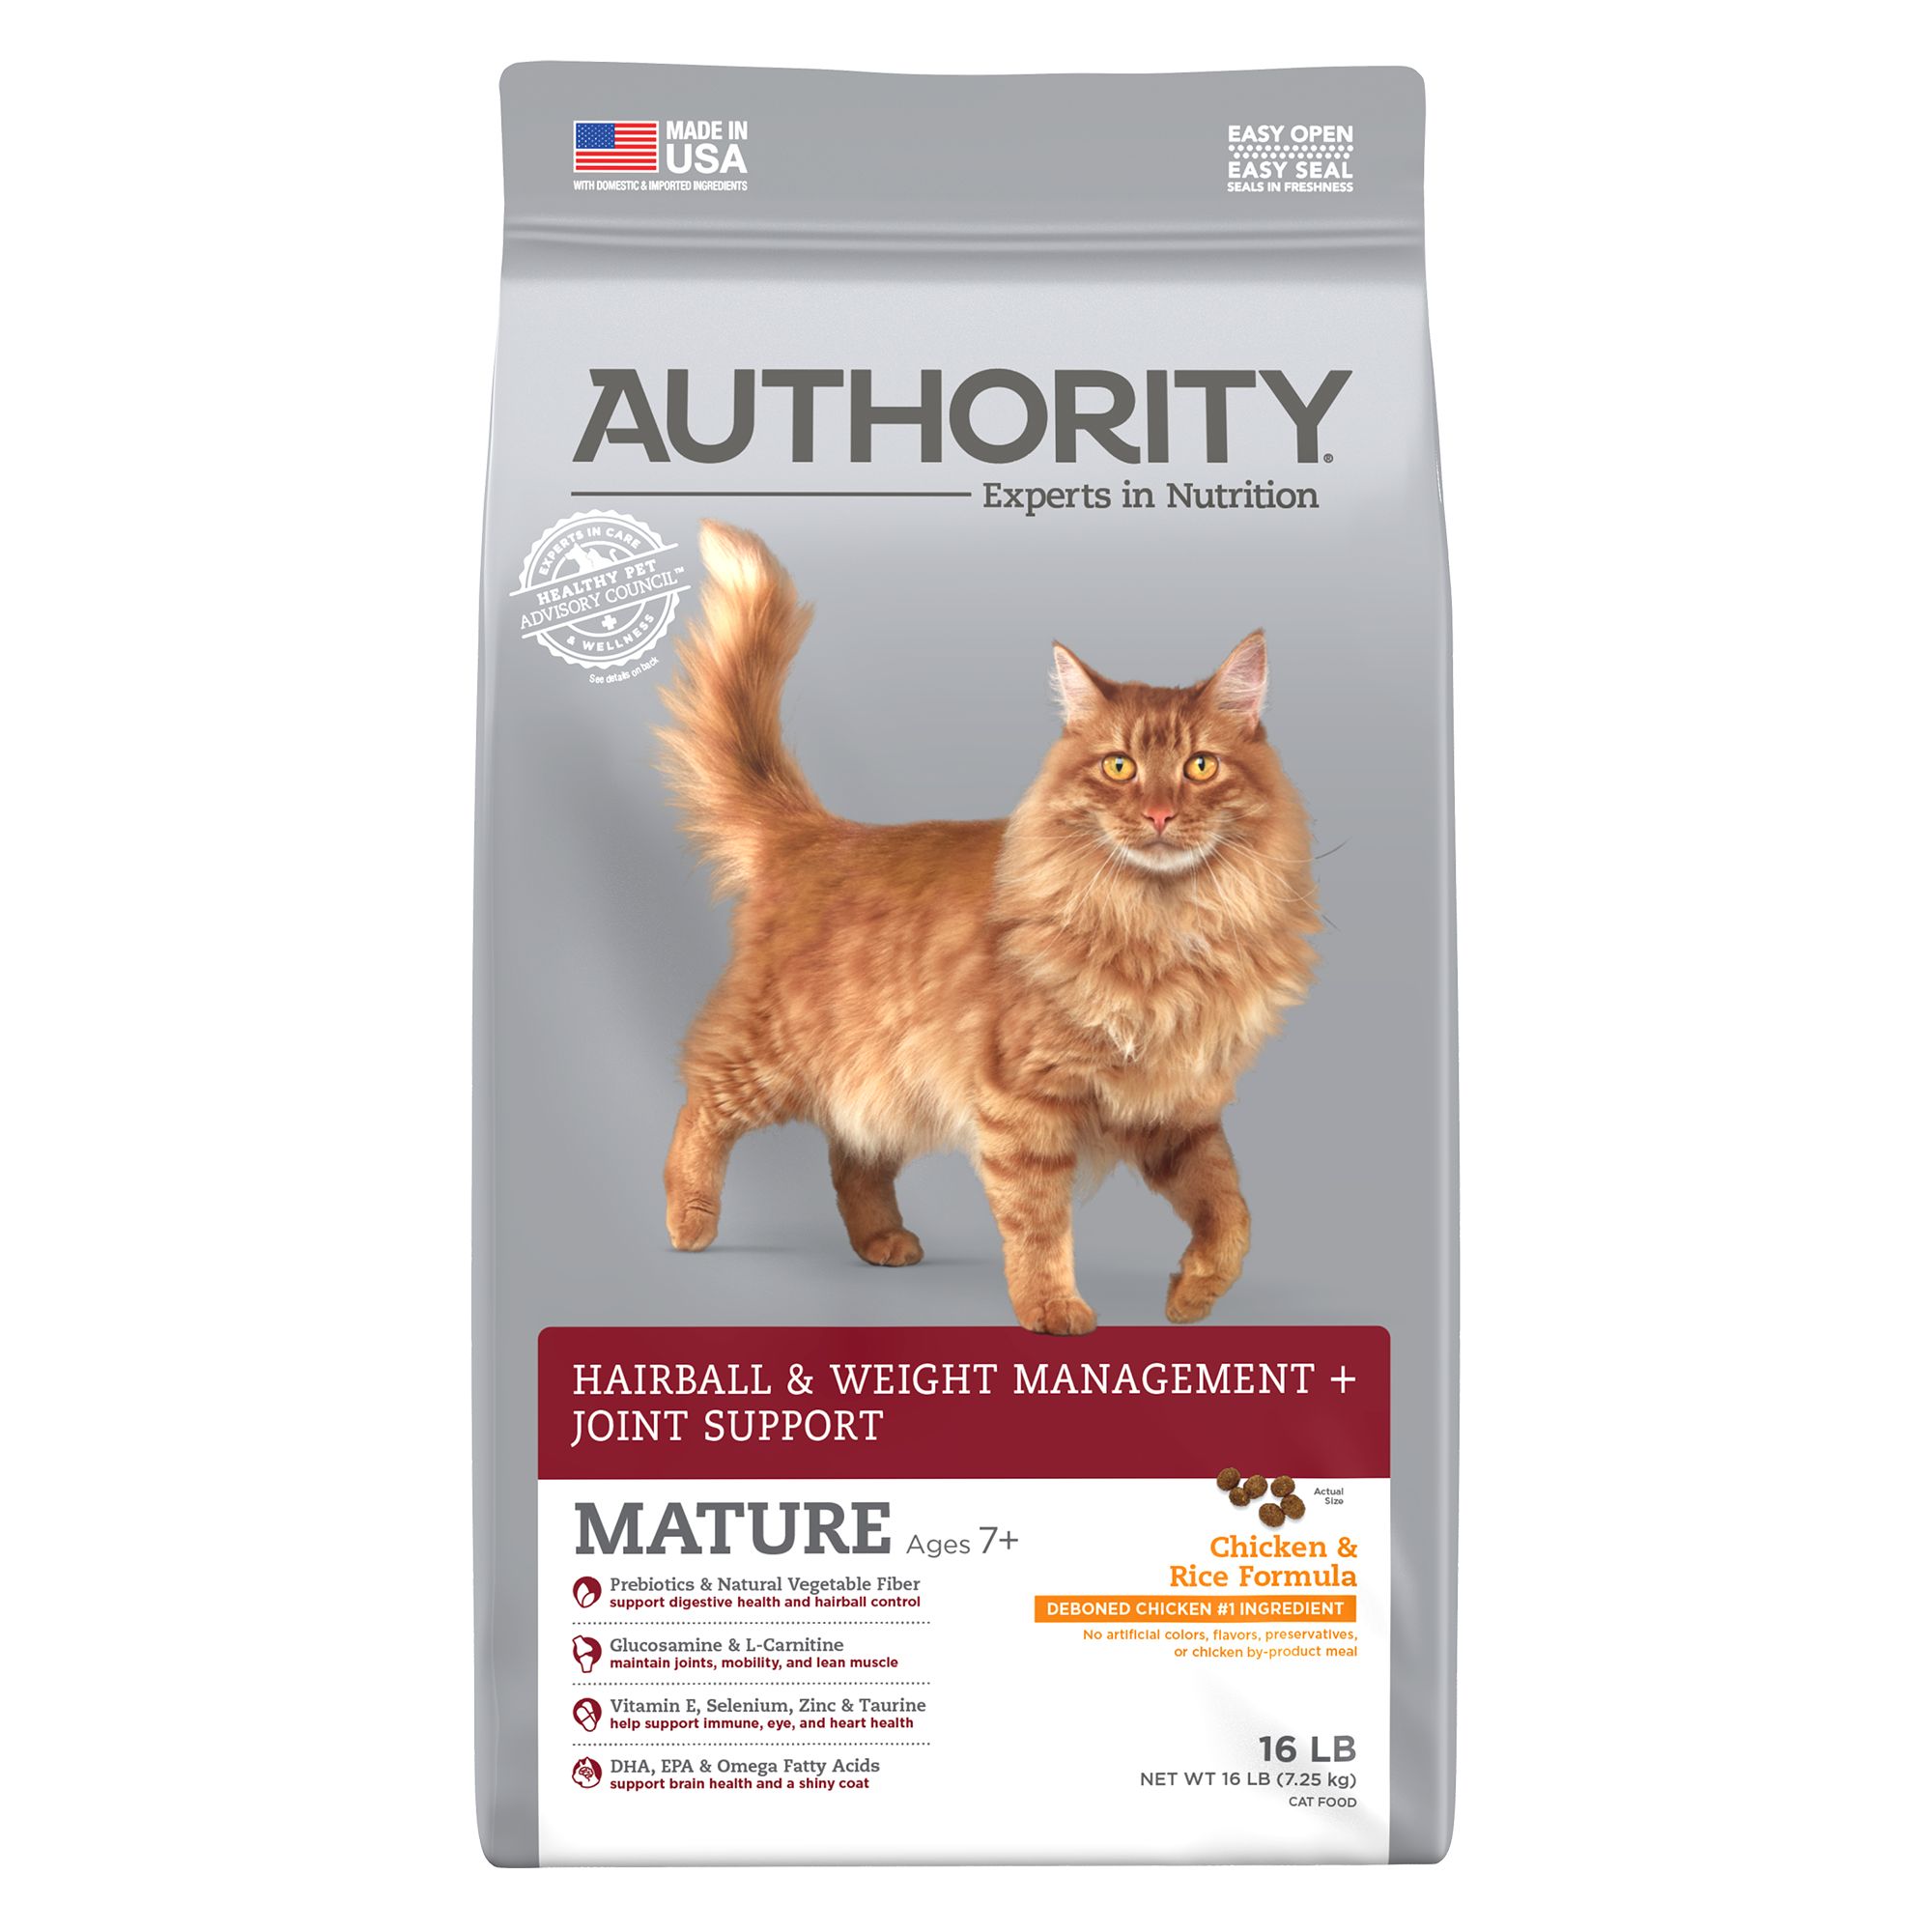 Authority® Hairball & Weight Managment + Joint Support Mature Adult Cat Food - Chicken & Rice